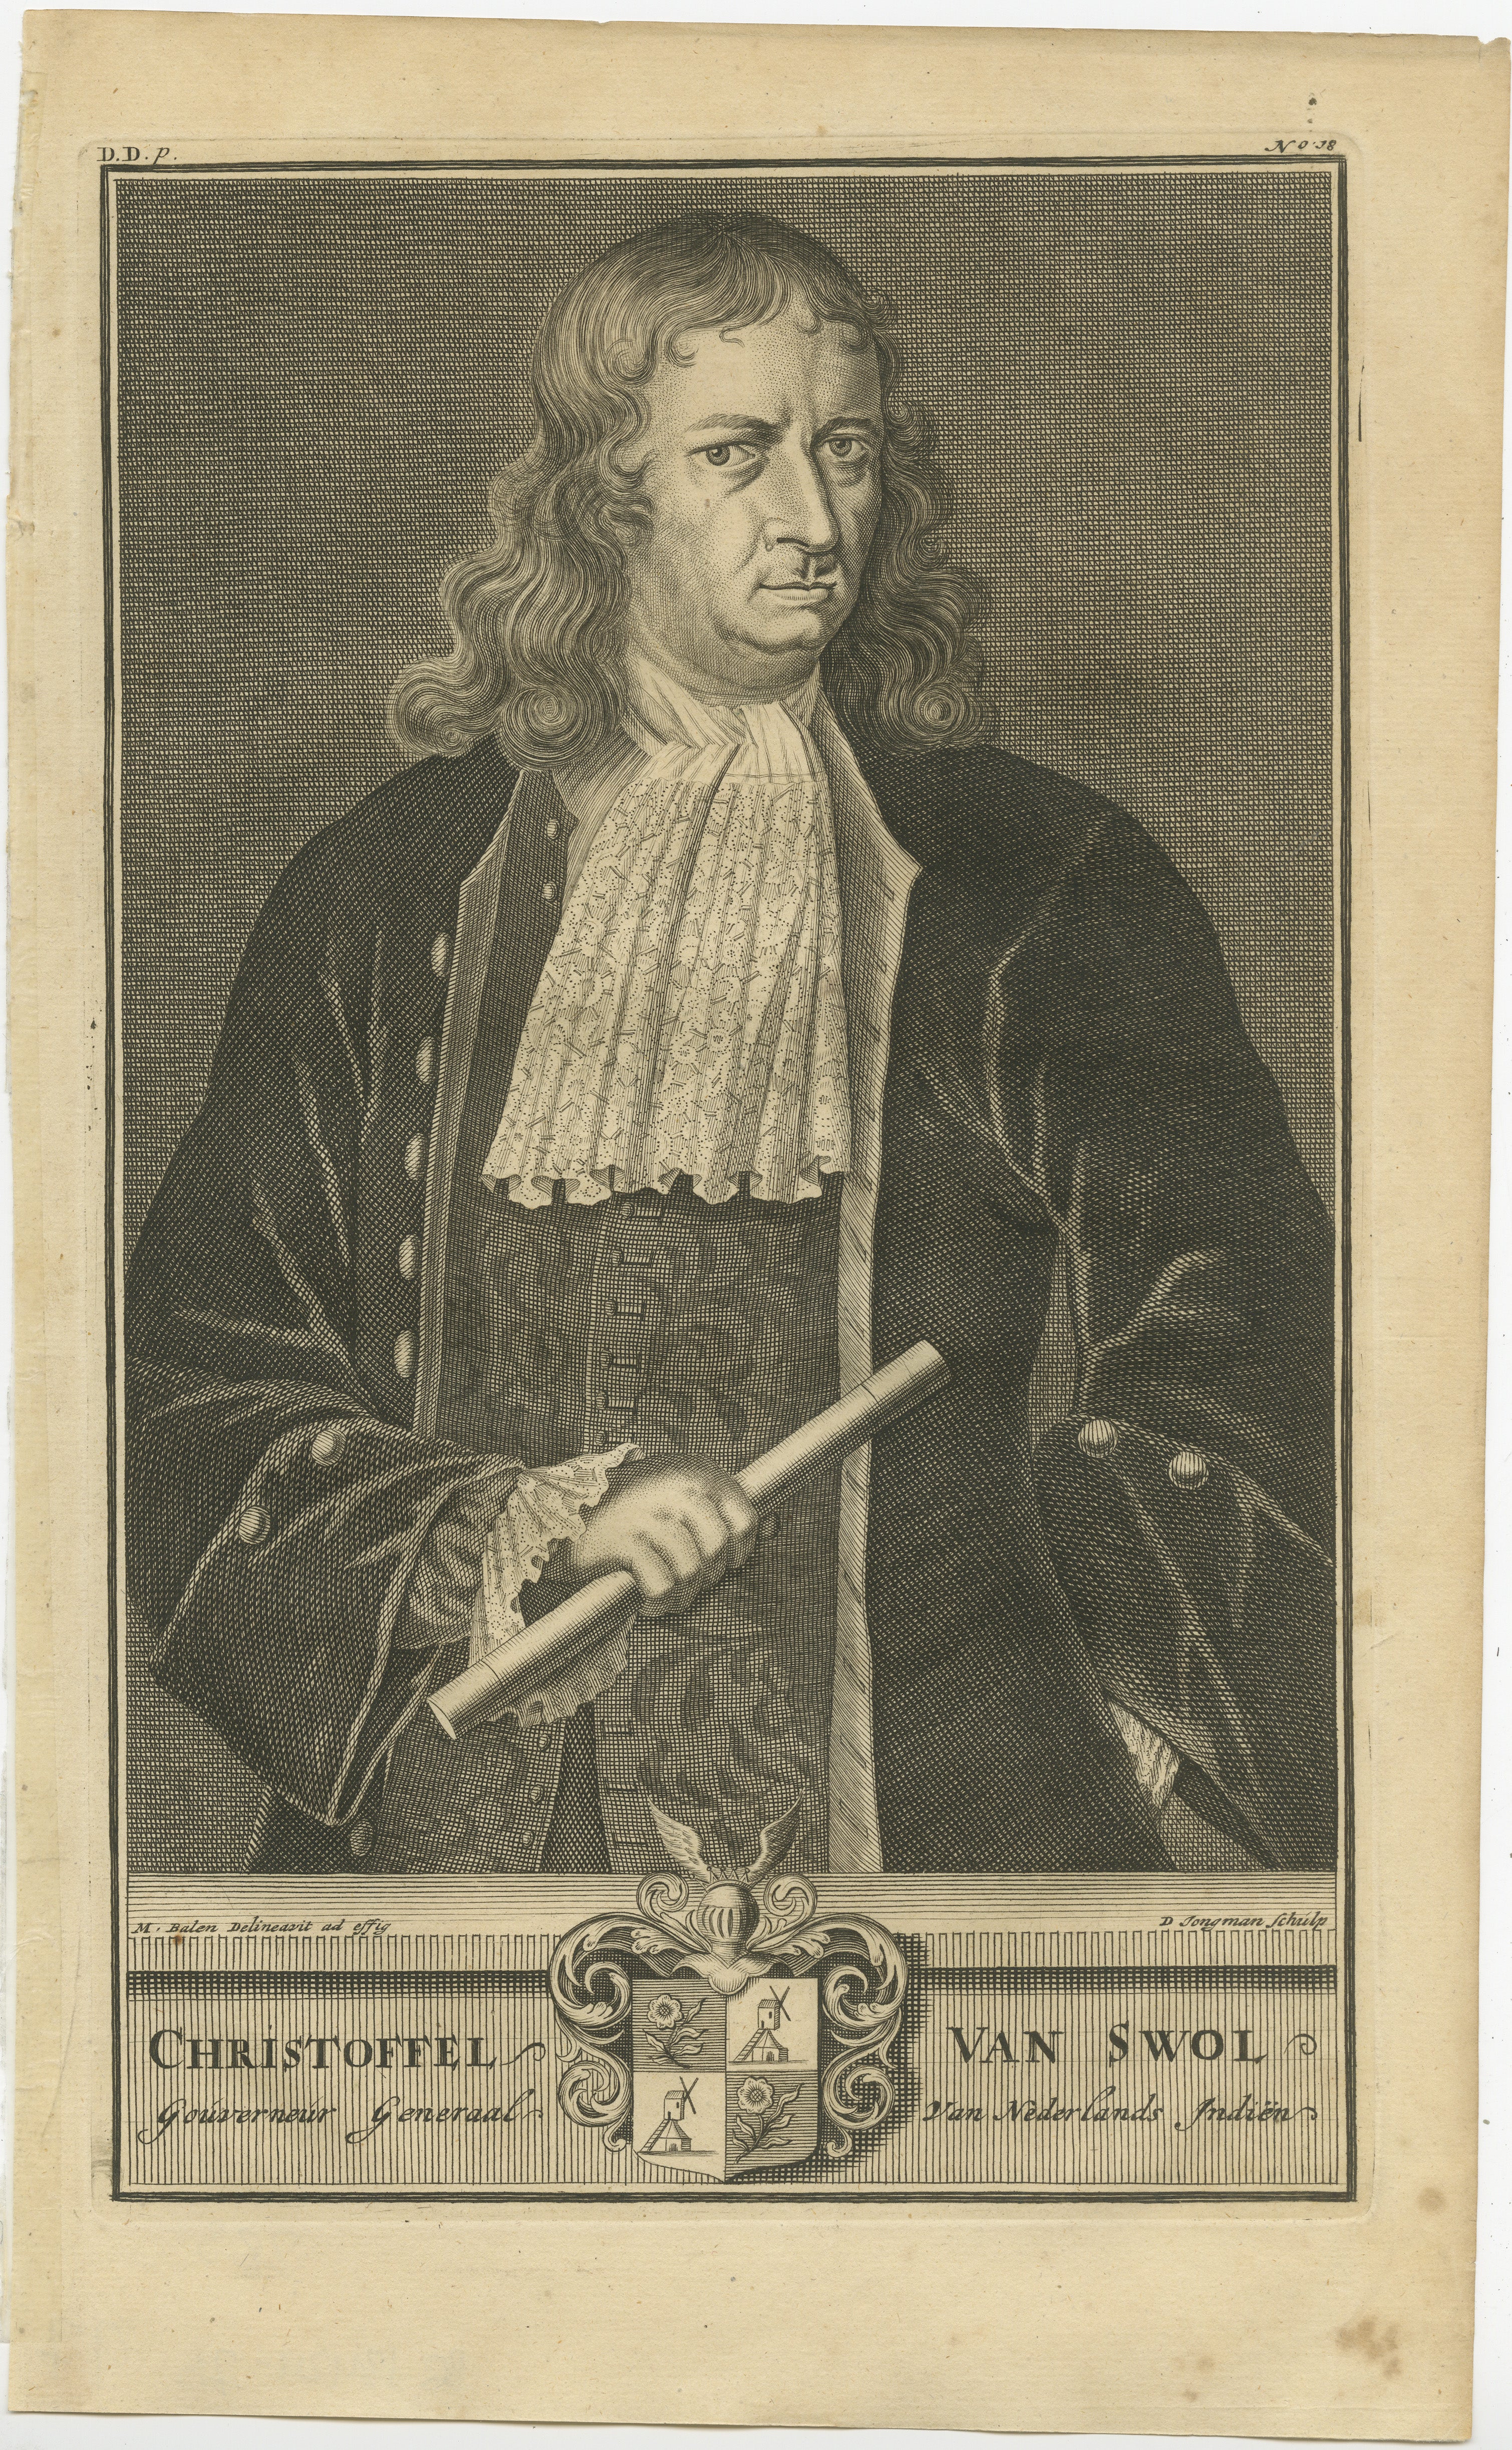 The portrait you've shown of Christoffel van Swol is an example of an early 18th-century engraving, likely created to honor his service as a Governor-General of the Dutch East India Company (VOC). The detailed artwork would have been a significant